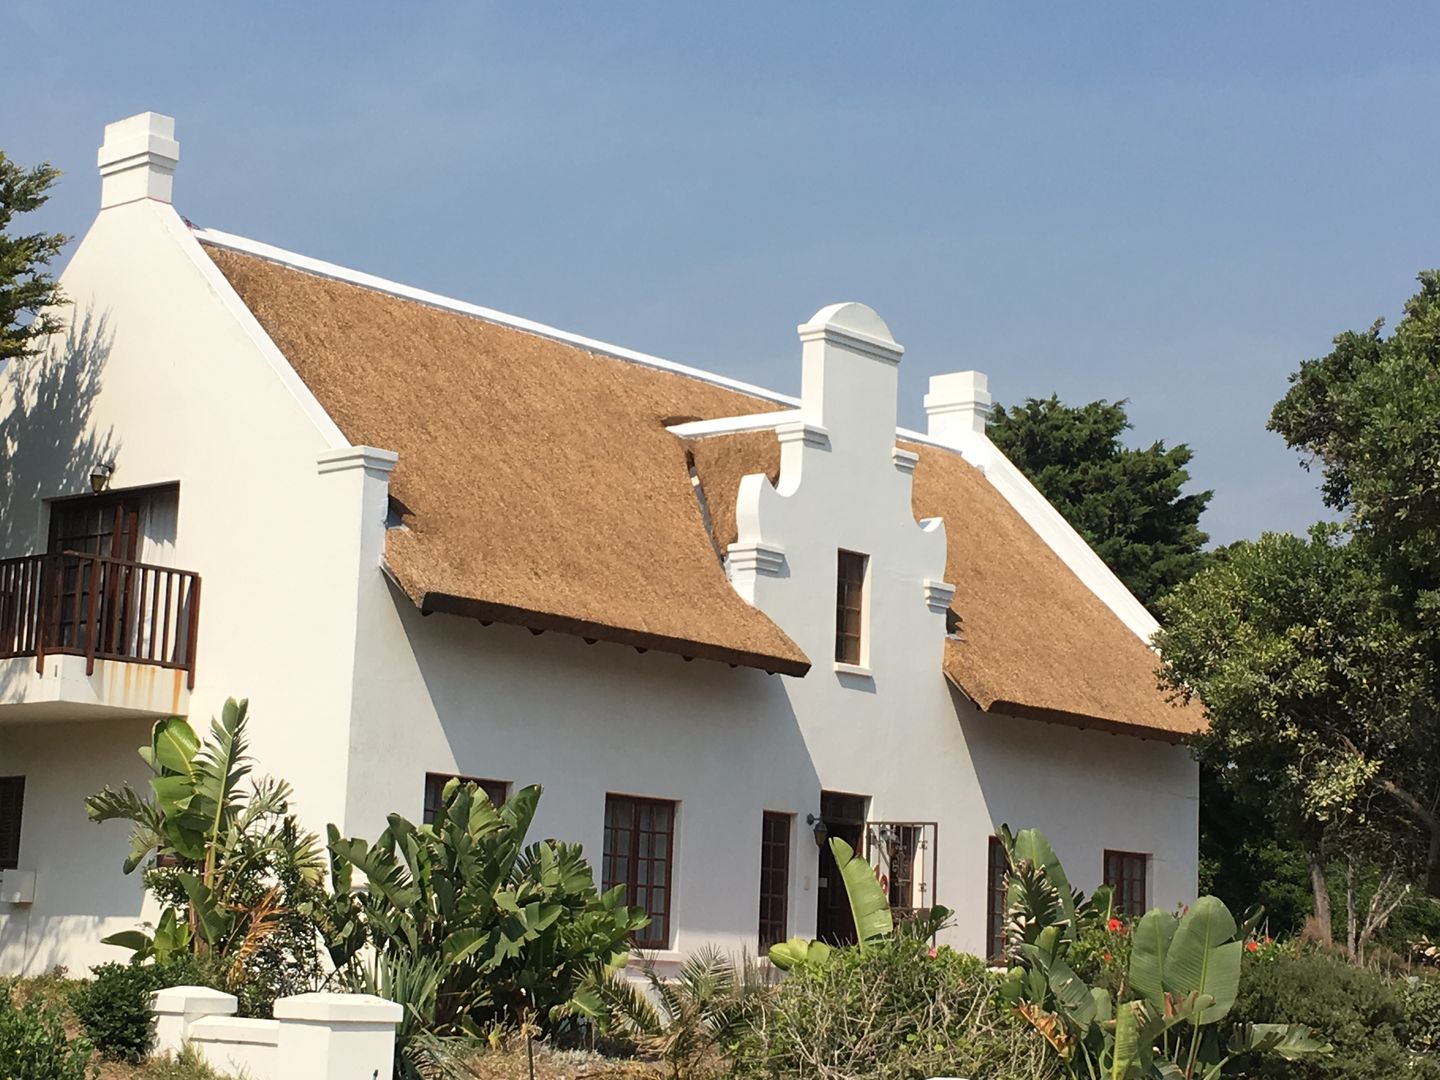 Colonial Style Home with Thatched Roof Bosazza Roofing & Timber Homes Houses